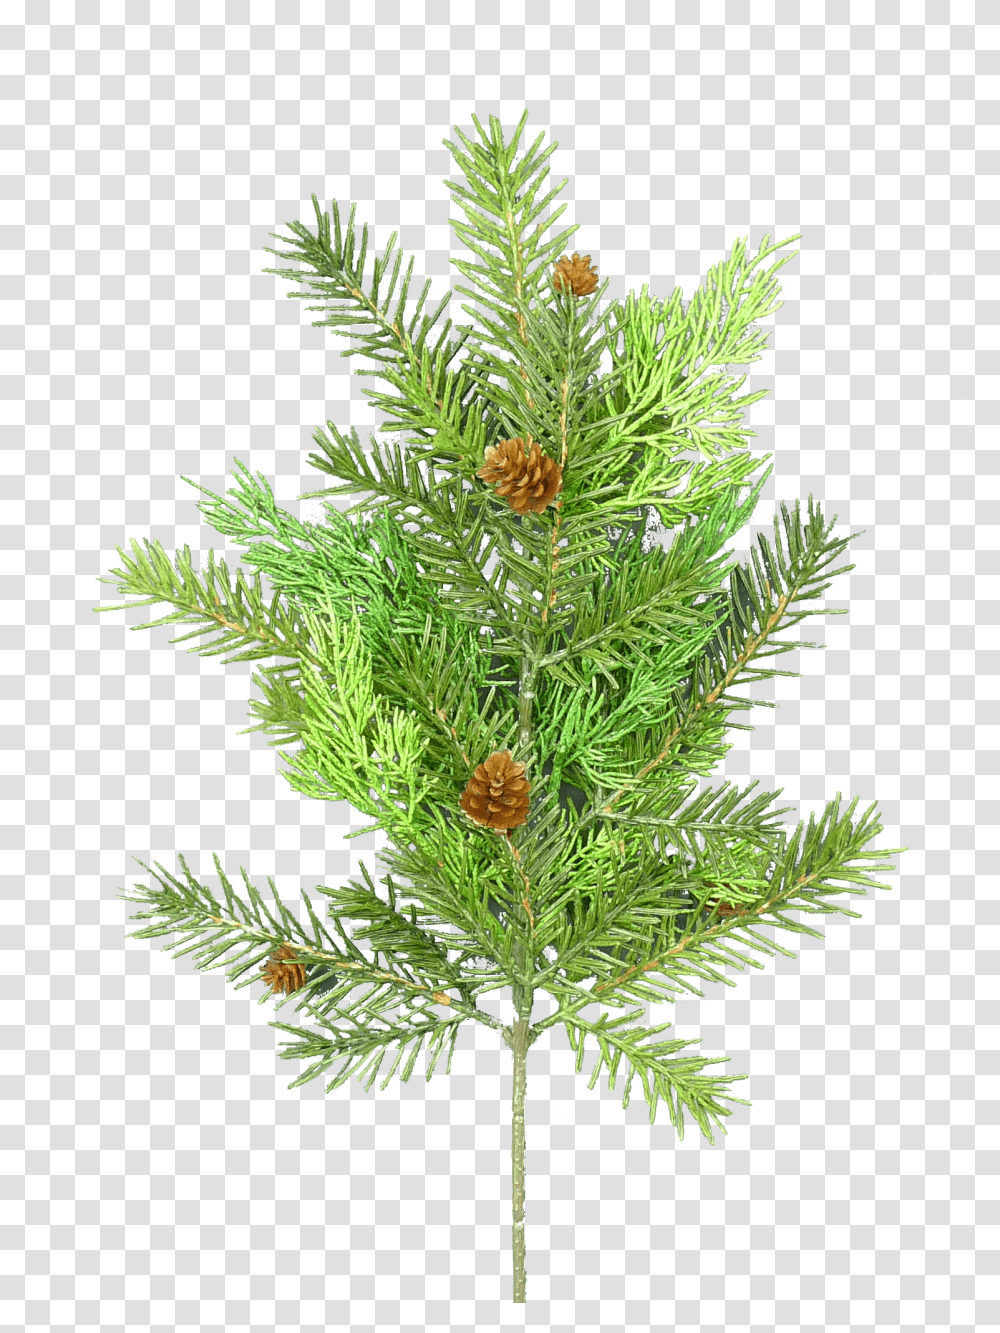 Pine Cedar Amp Pinecone Spray Ferns In French, Tree, Plant, Conifer, Spruce Transparent Png